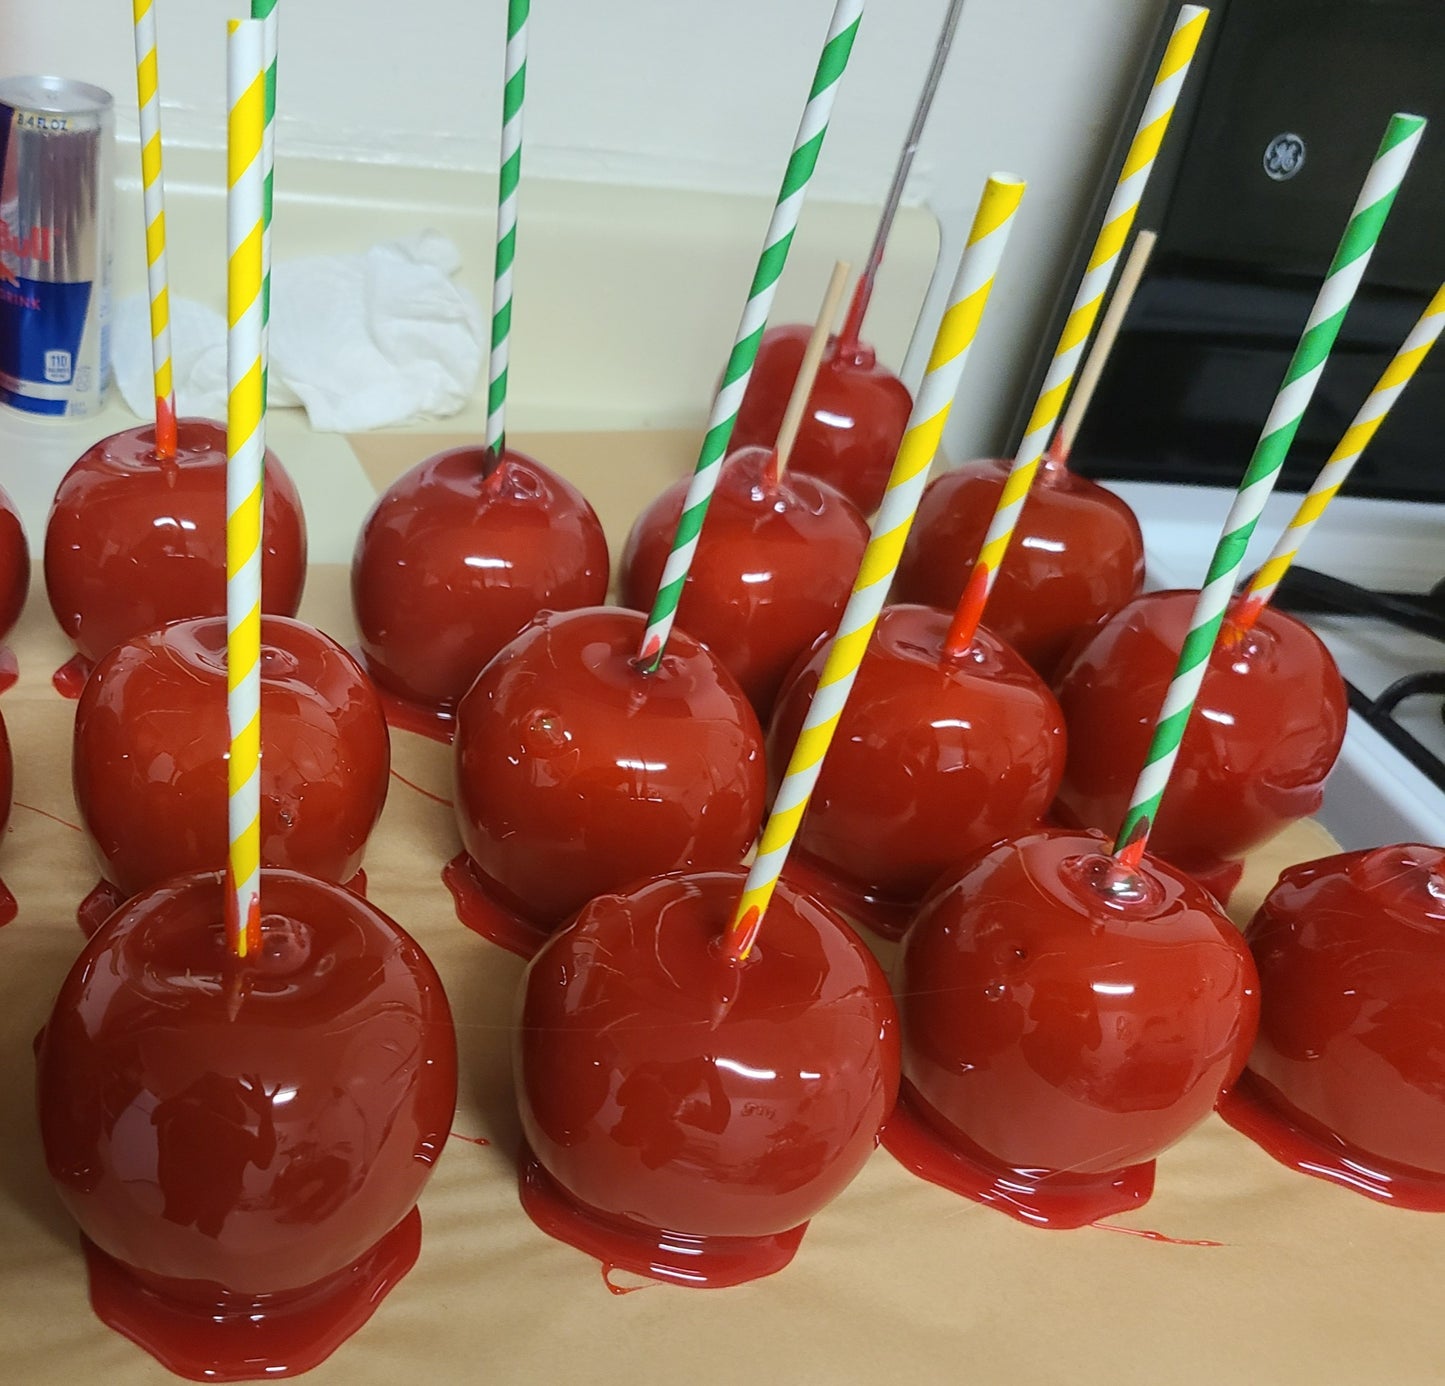 Candy Coated Apples